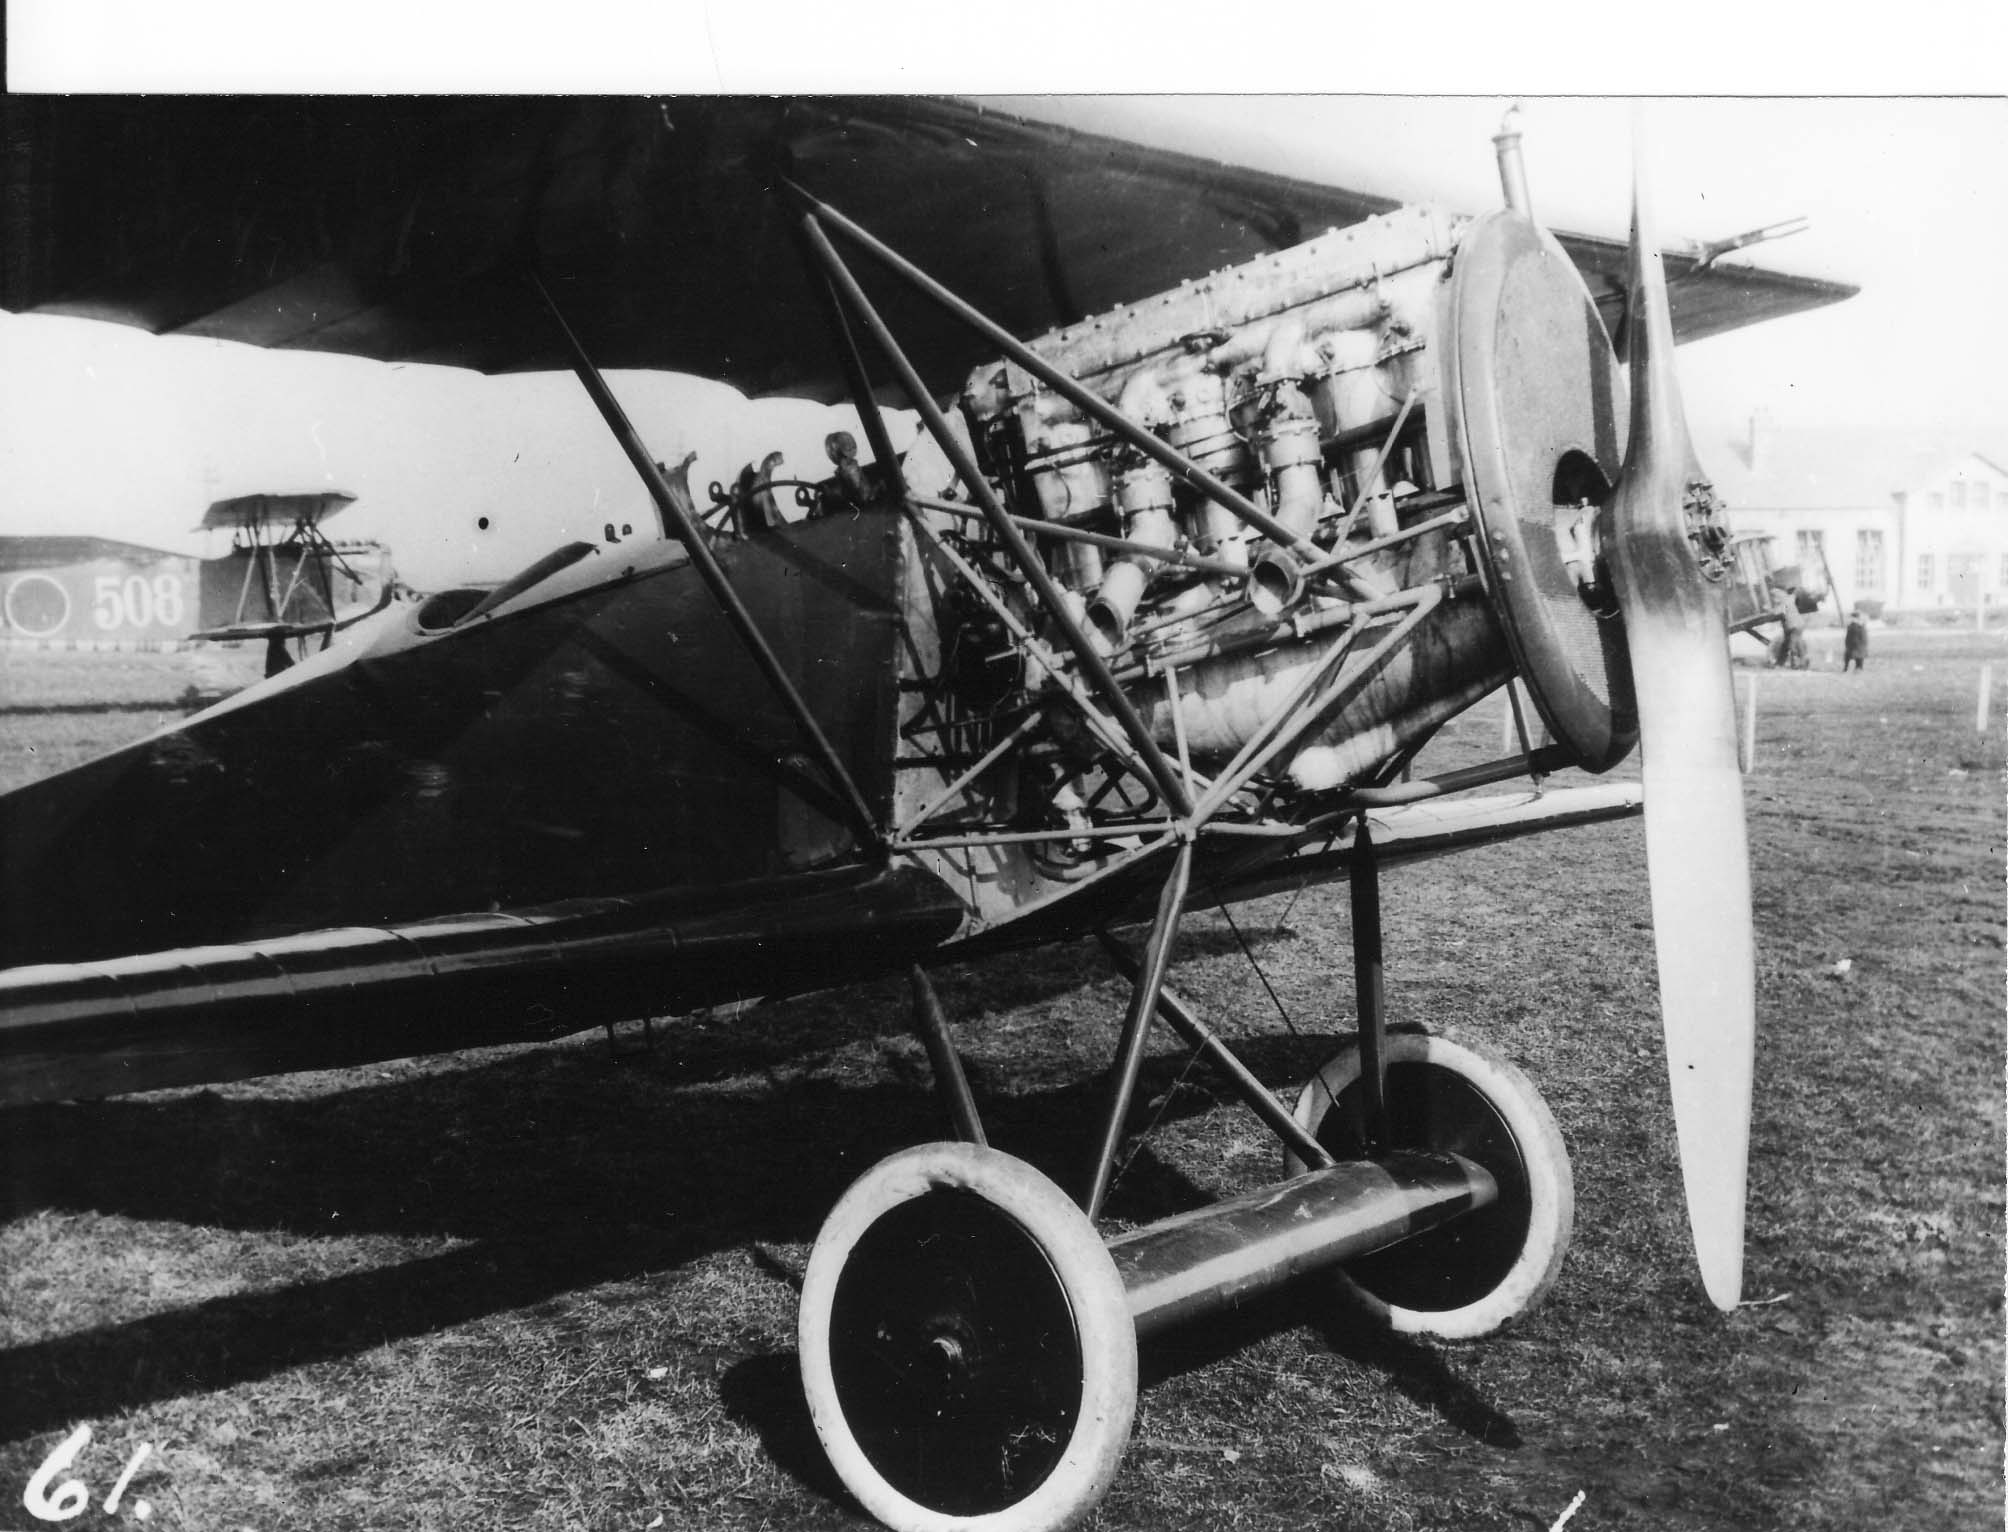 The Puma engine installation in the LA-KNIL Fokker D.VII